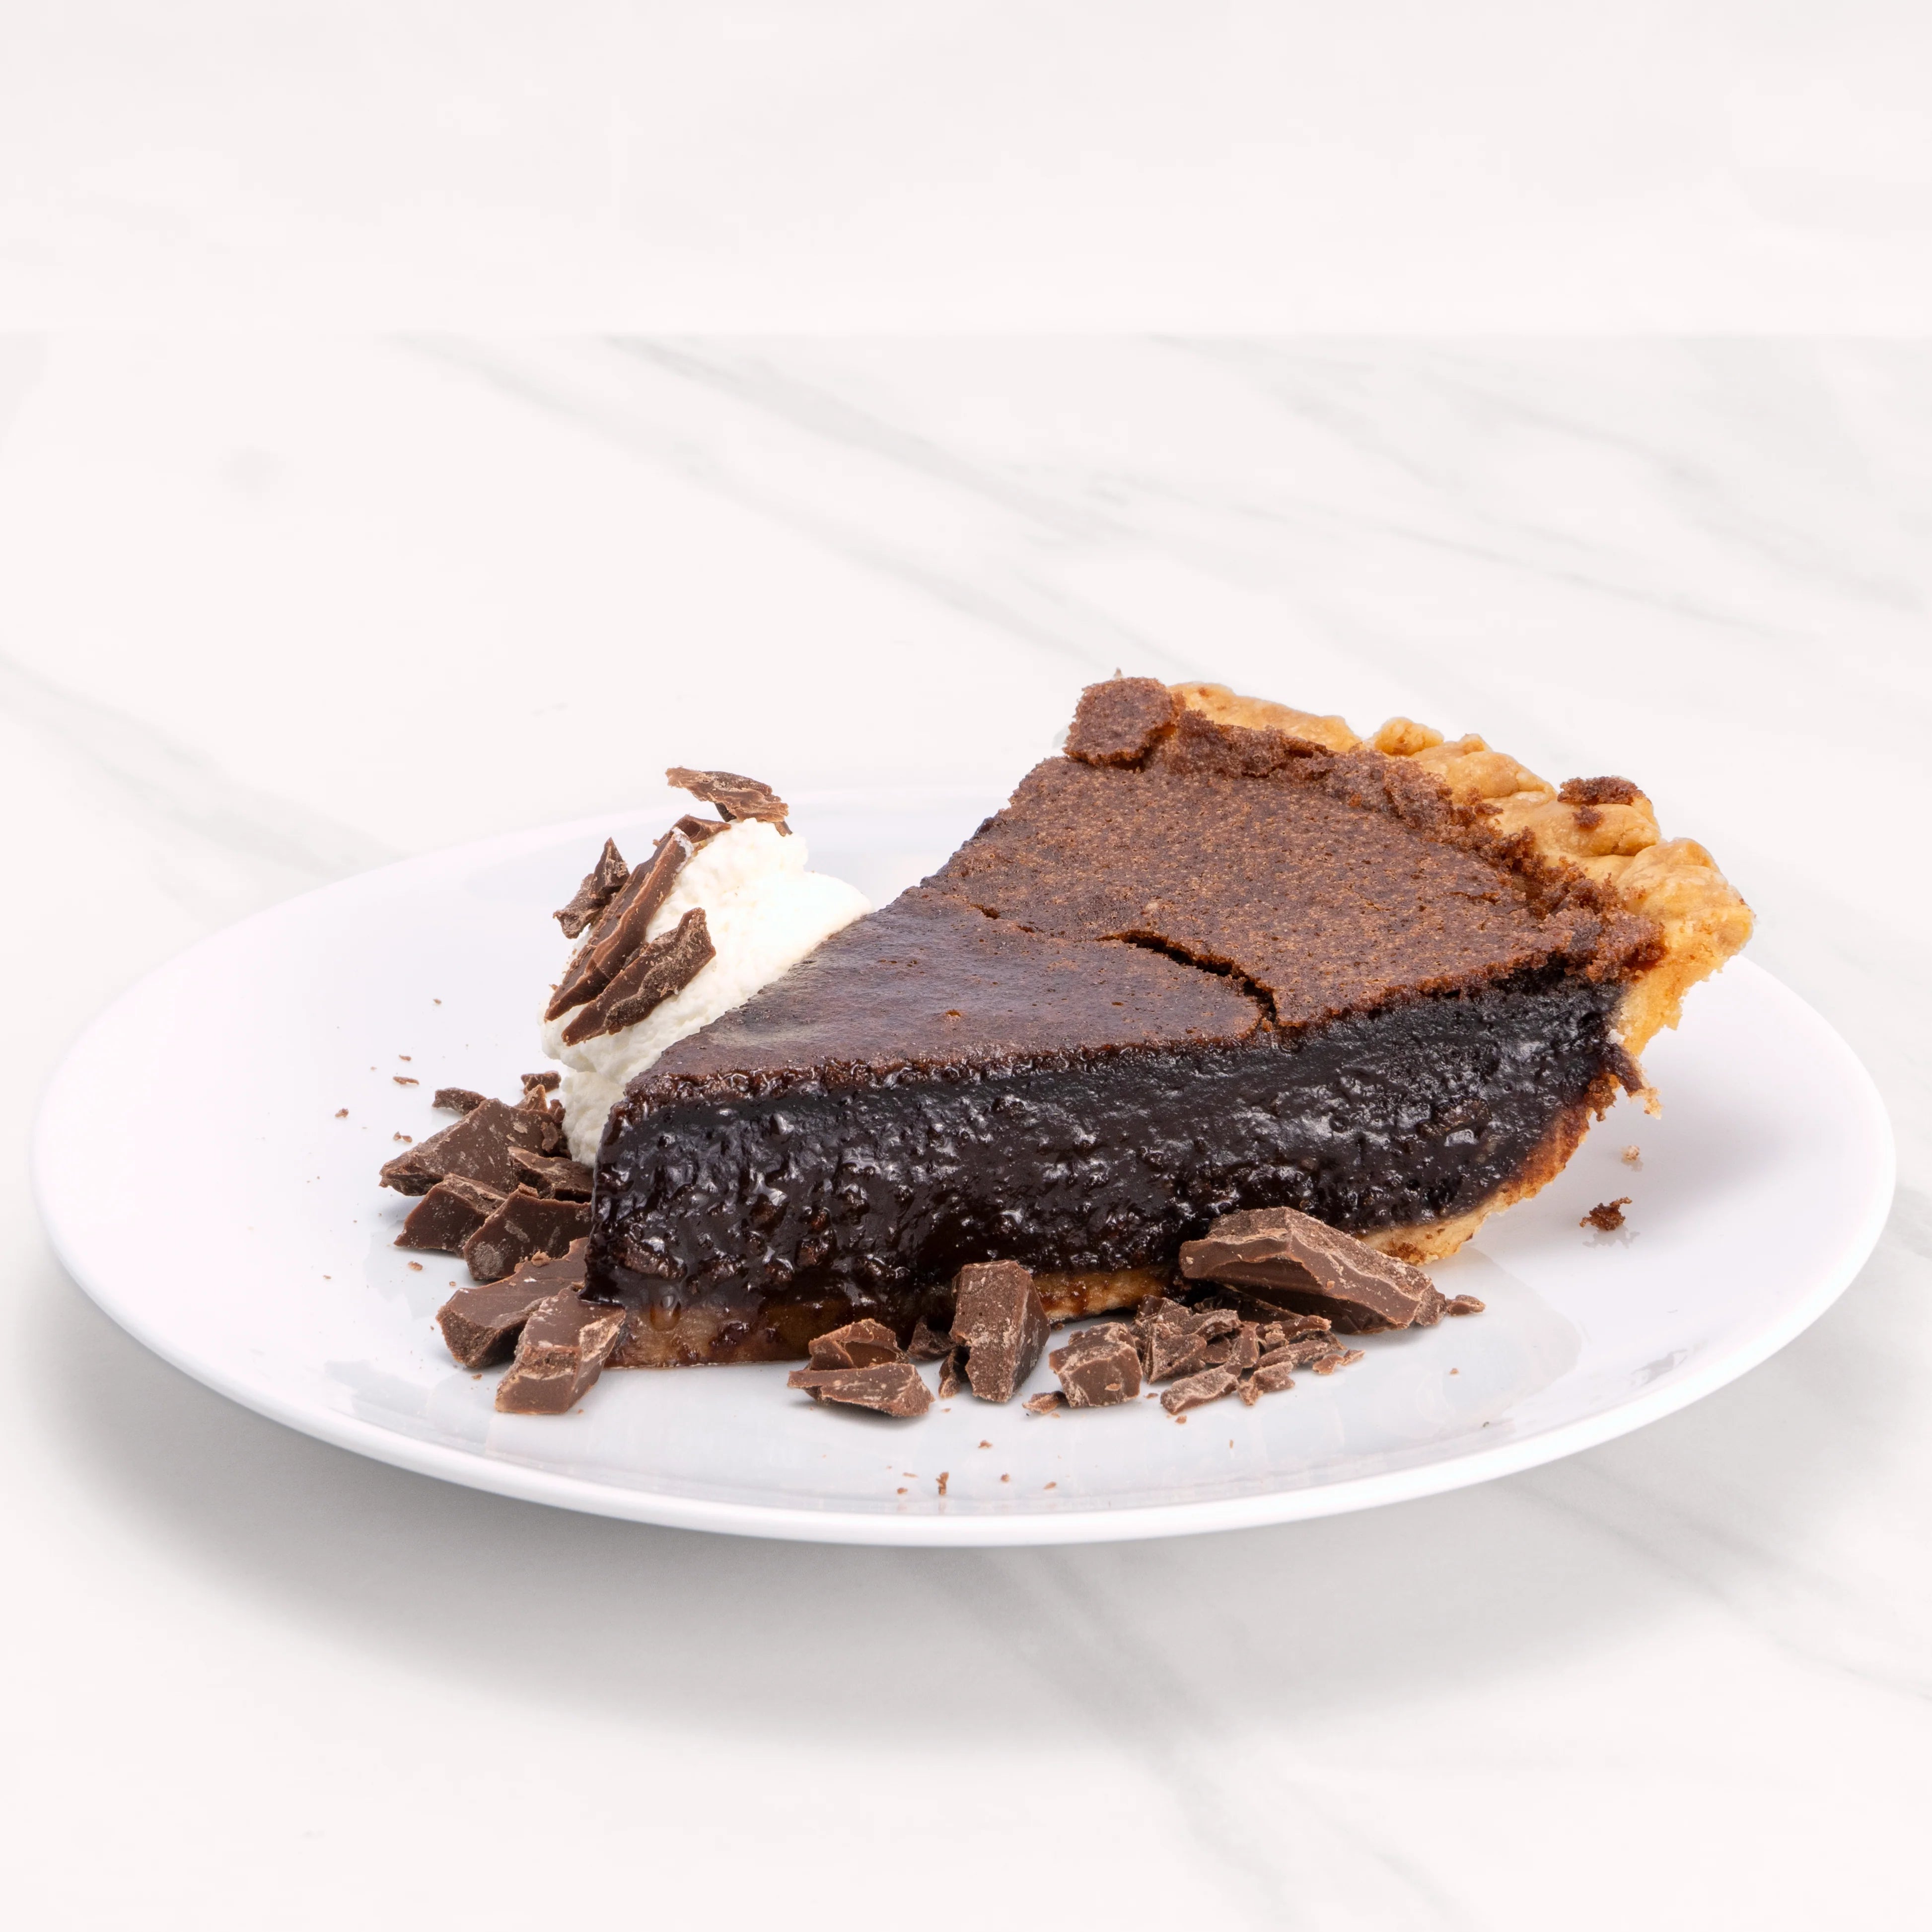 Slice of Heavenly Chocolate Pie garnished with chocolate and a dollop of crème.